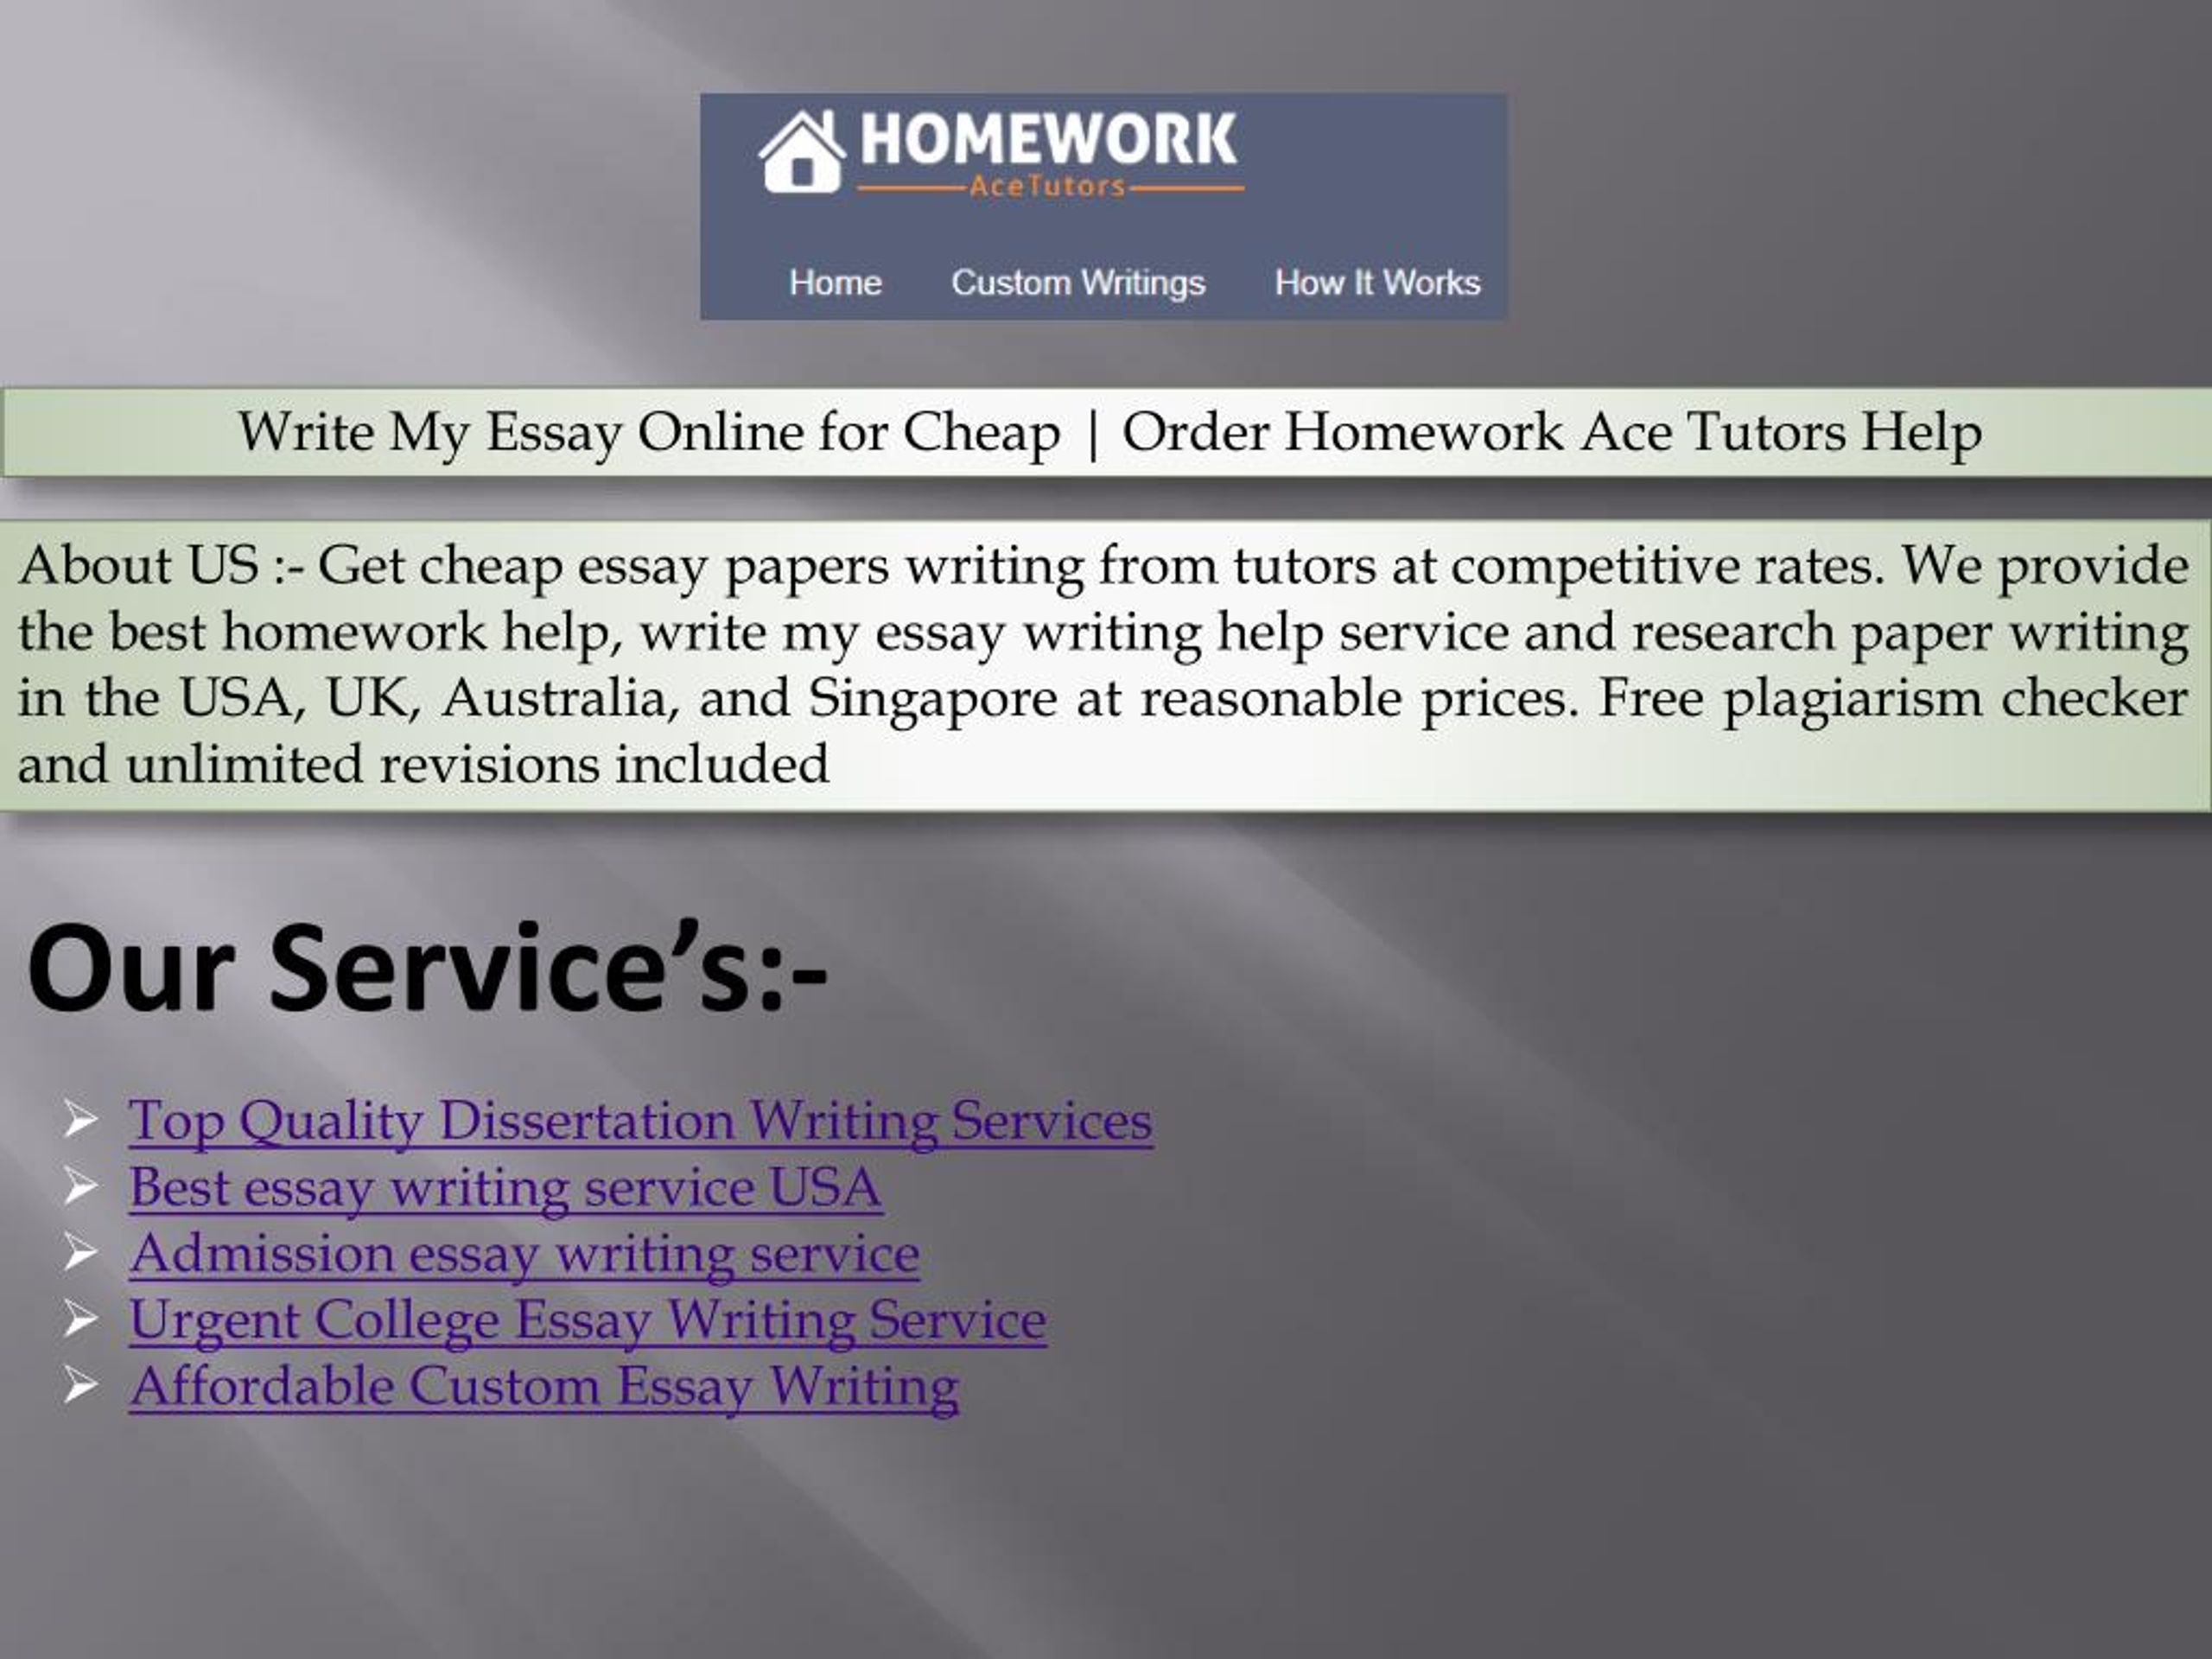 paper now review Is Essential For Your Success. Read This To Find Out Why